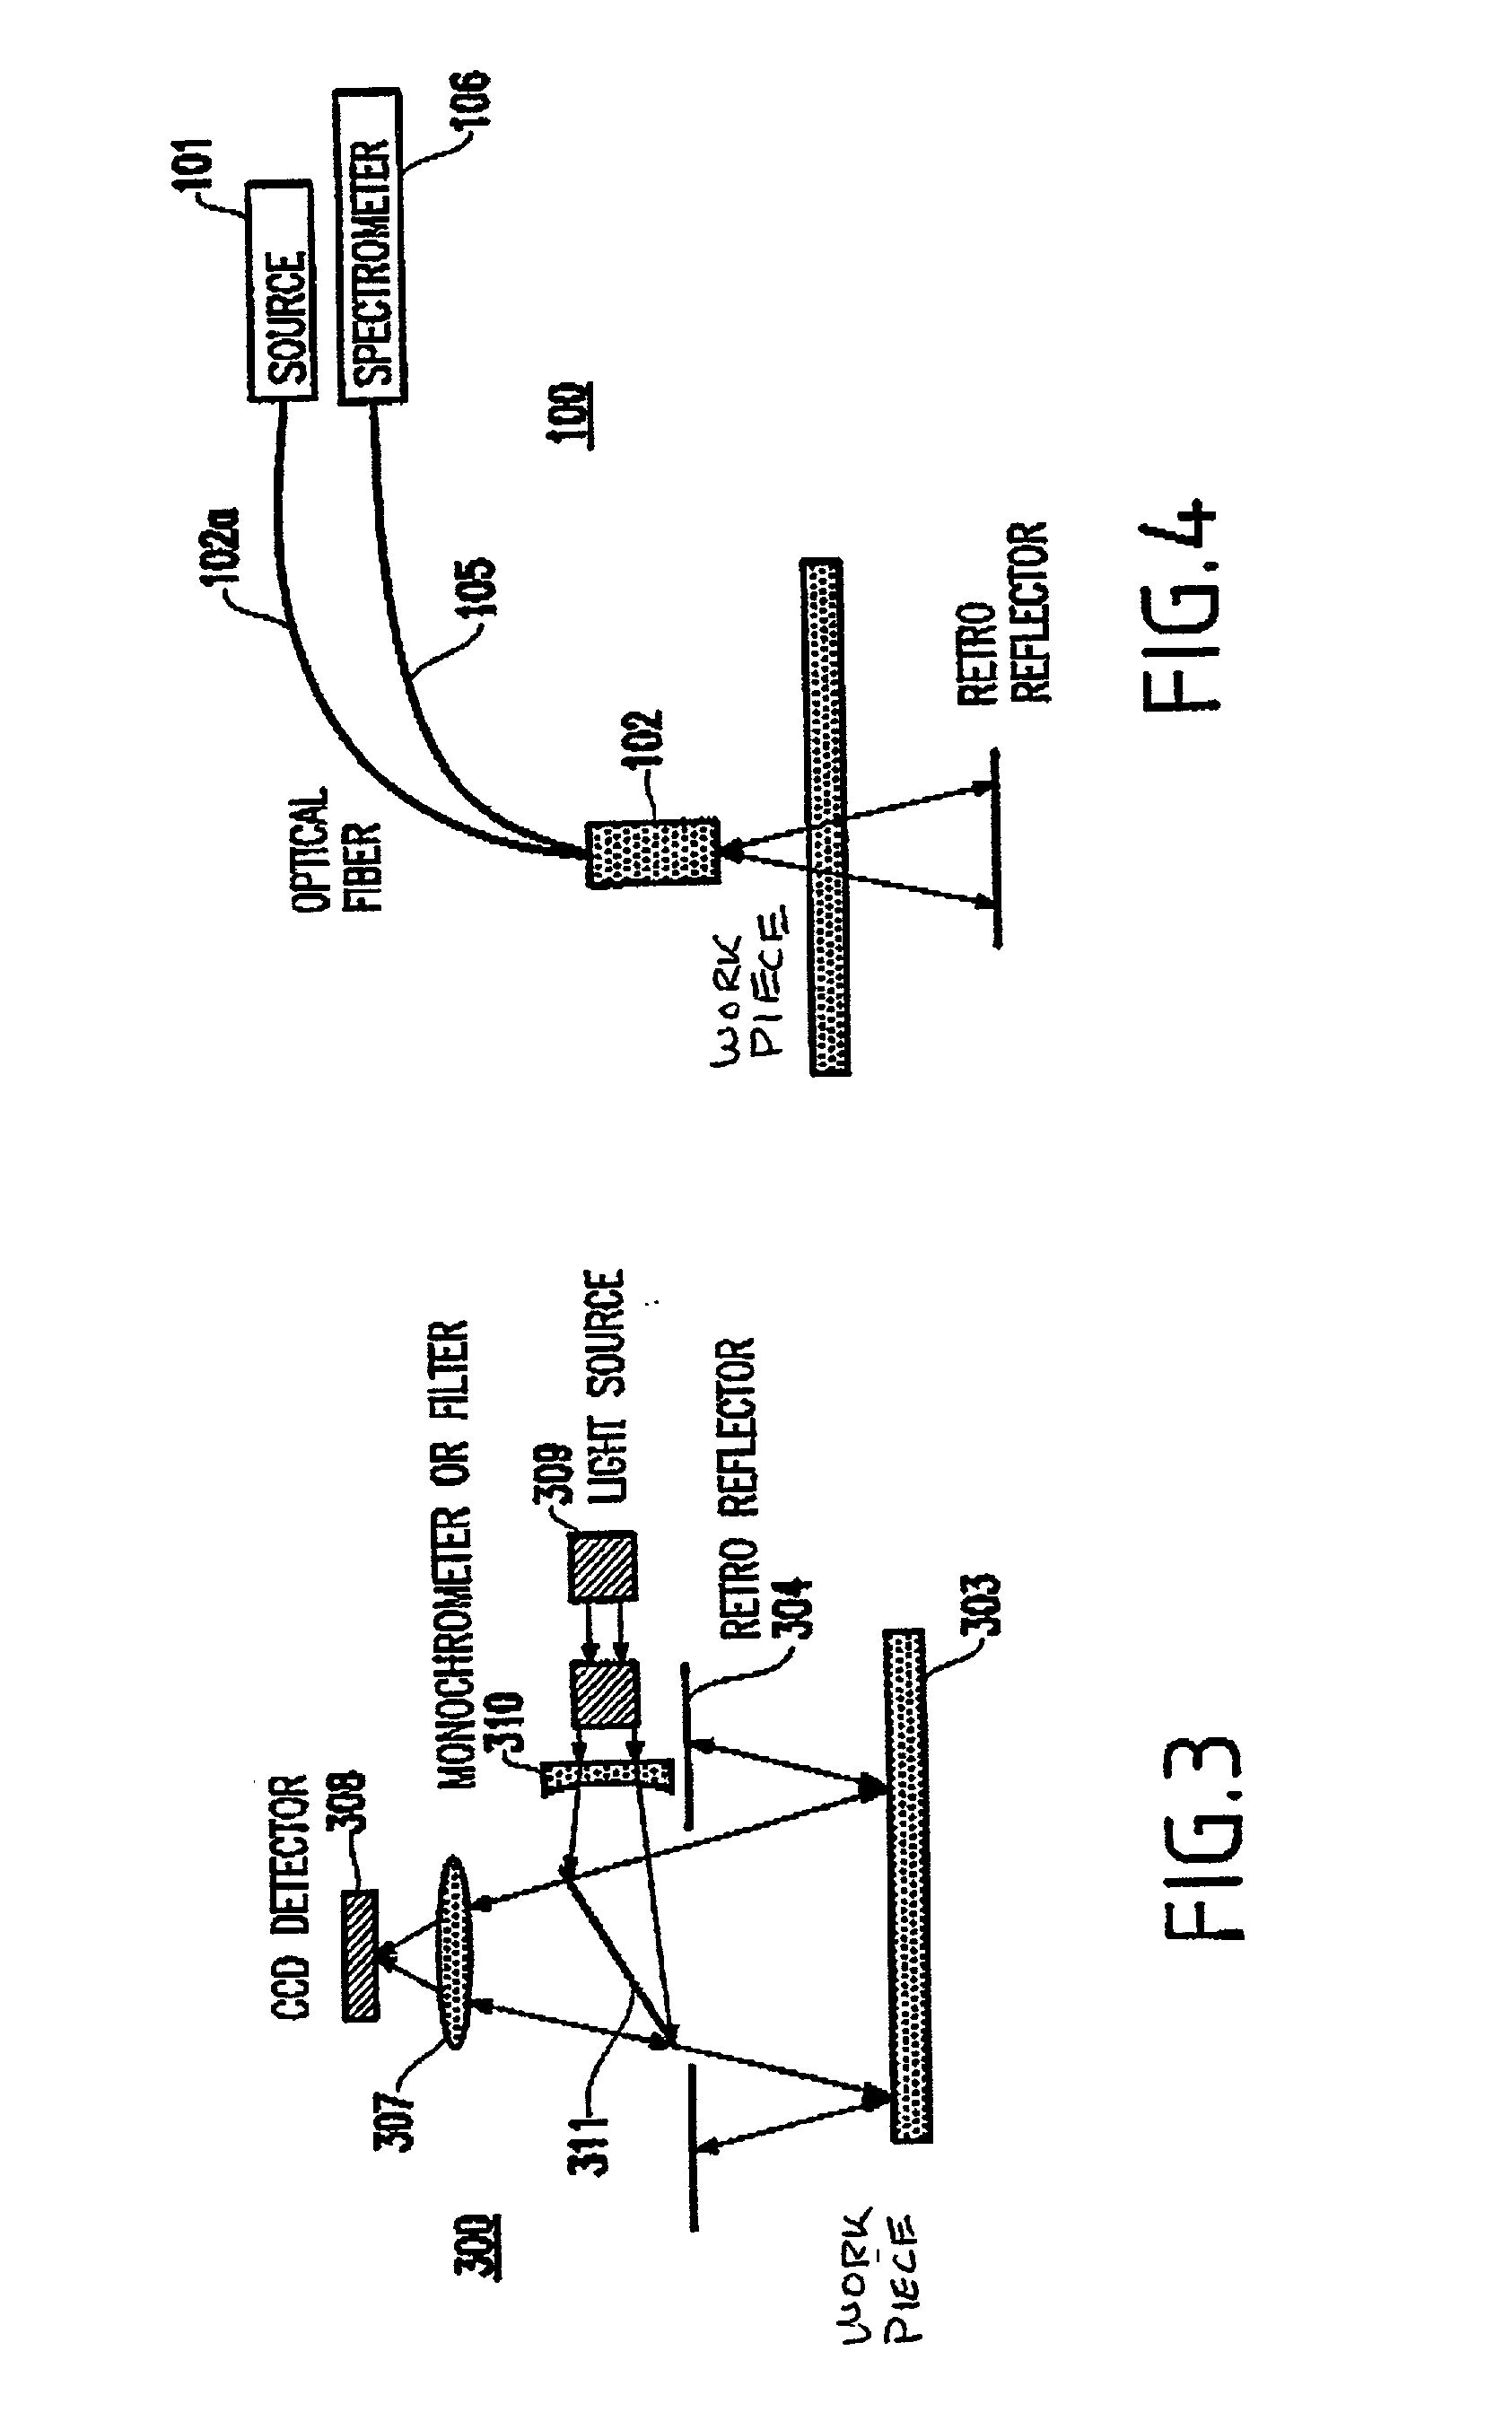 Support and alignment device for enabling chemical mechanical polishing rinse and film measurements